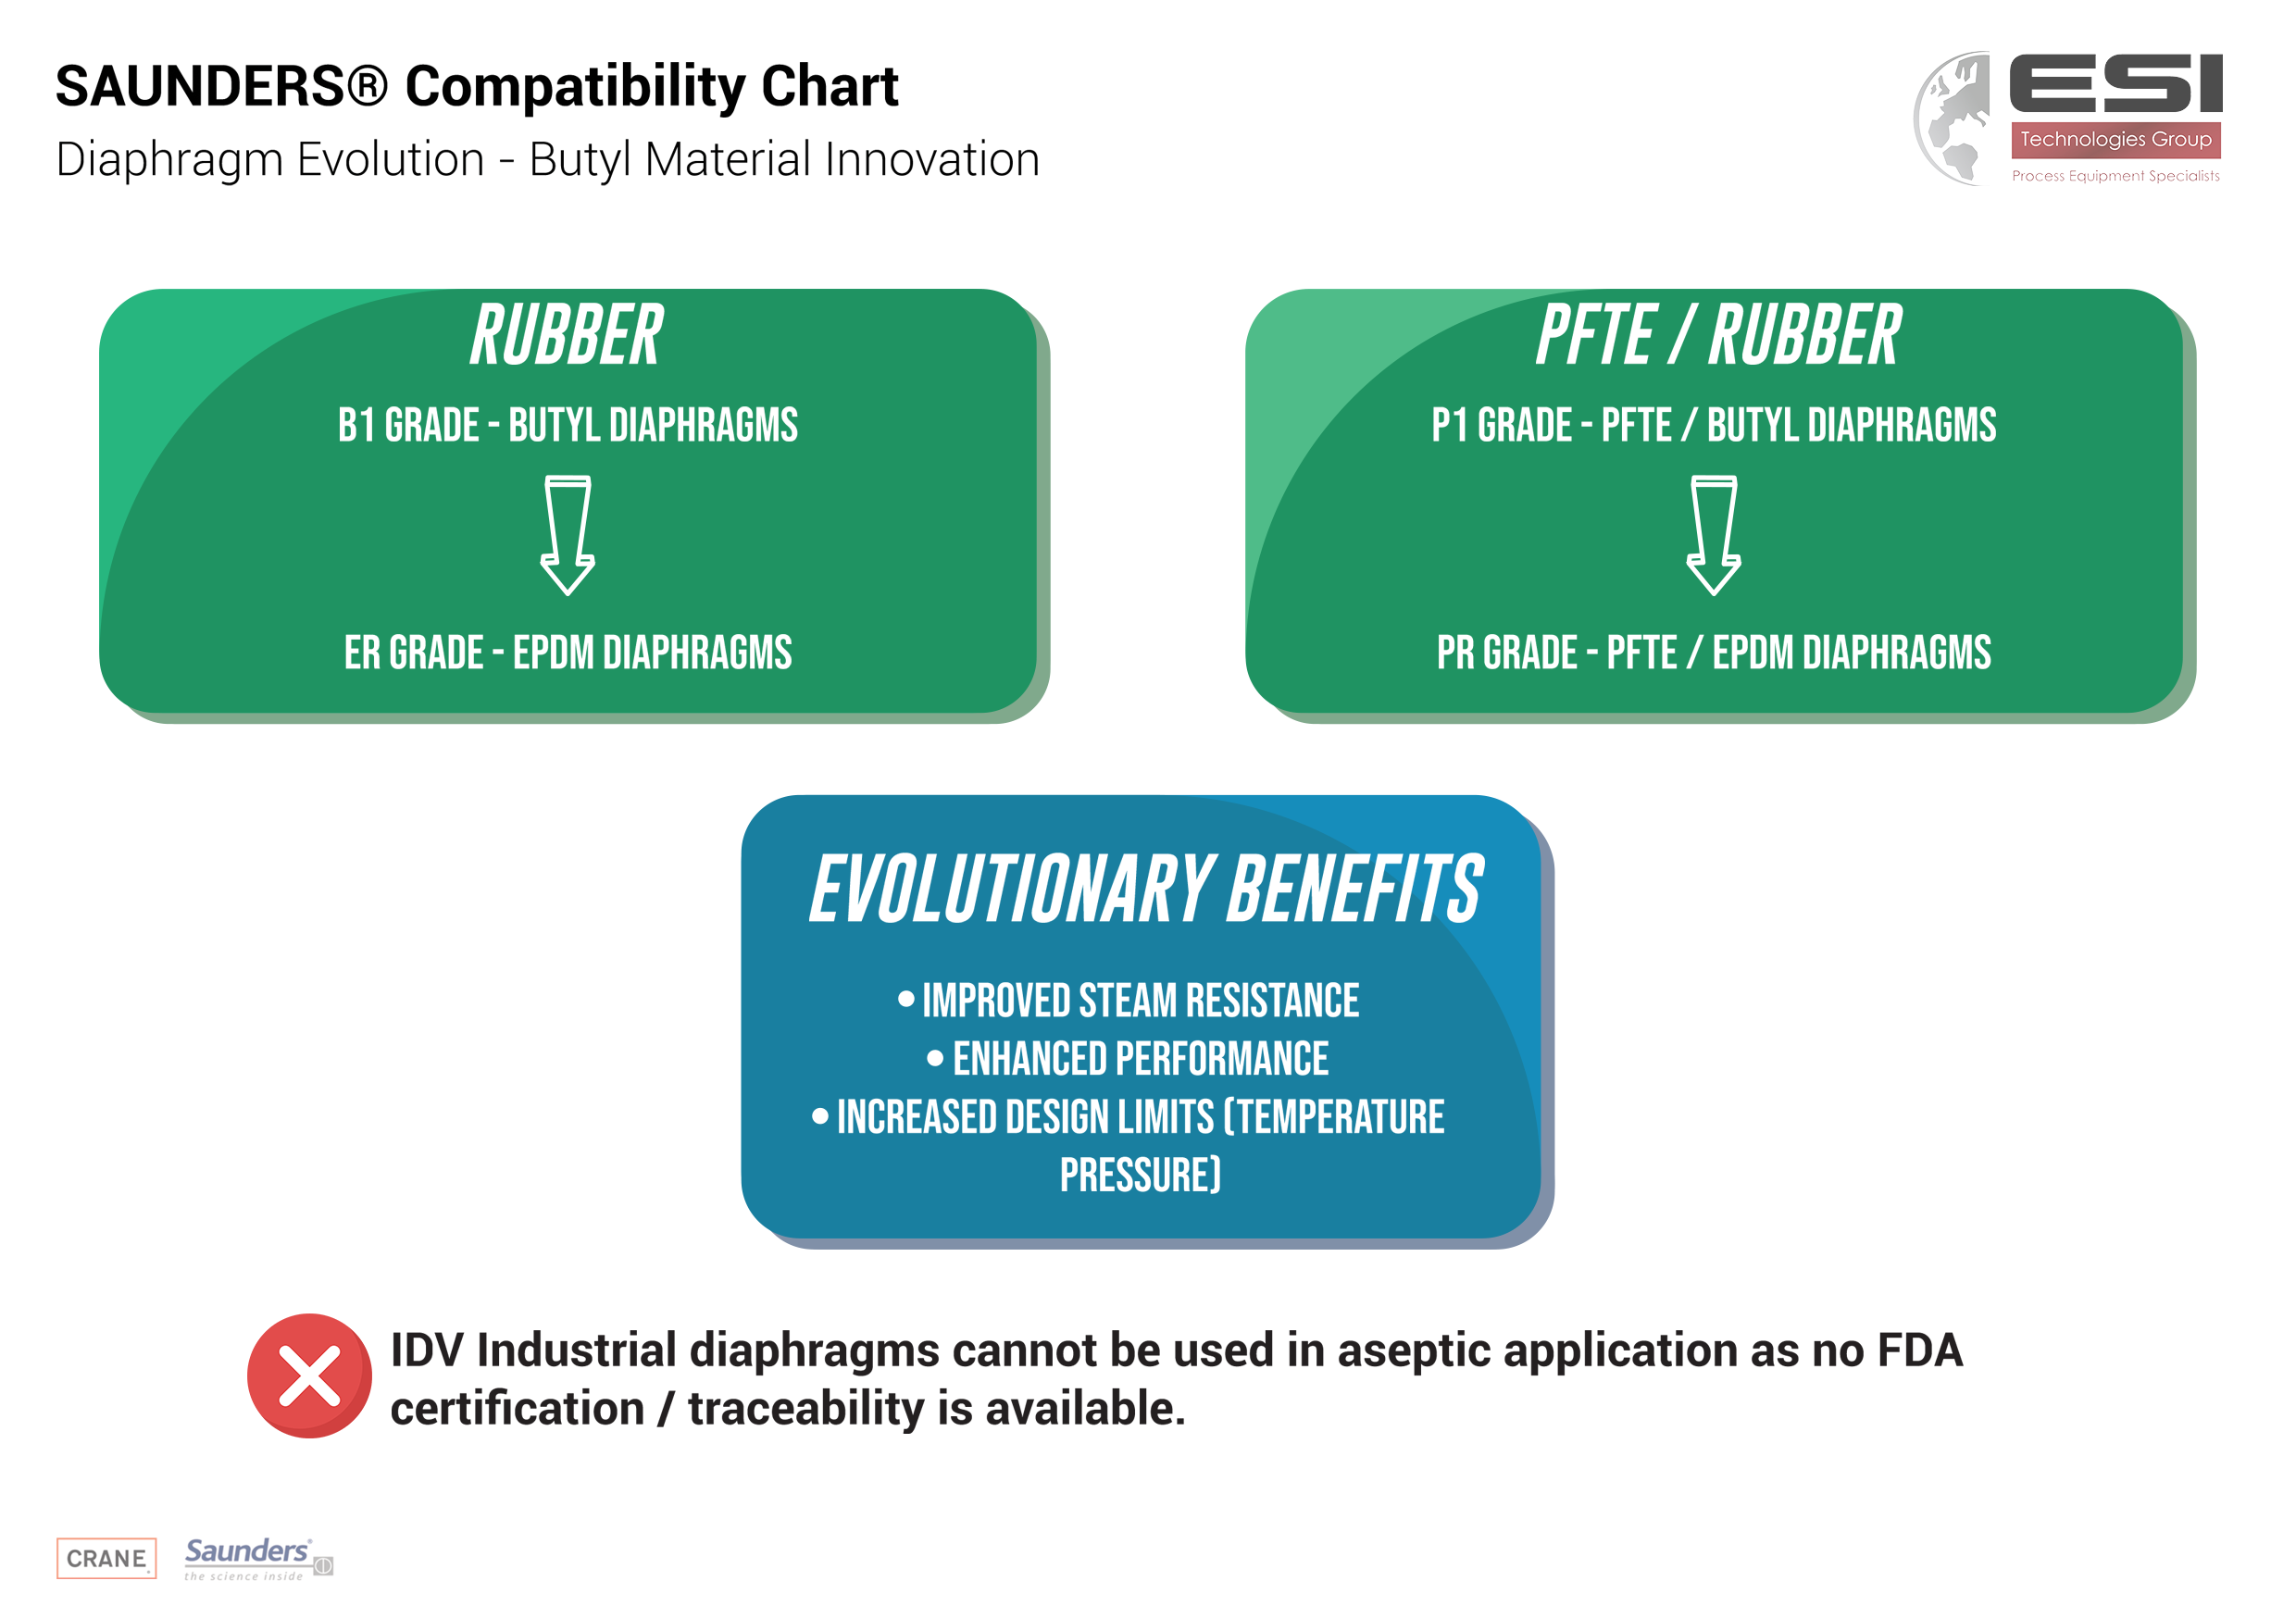 Saunders Compatability Chart - Illustrating the innovation of Butyl Material